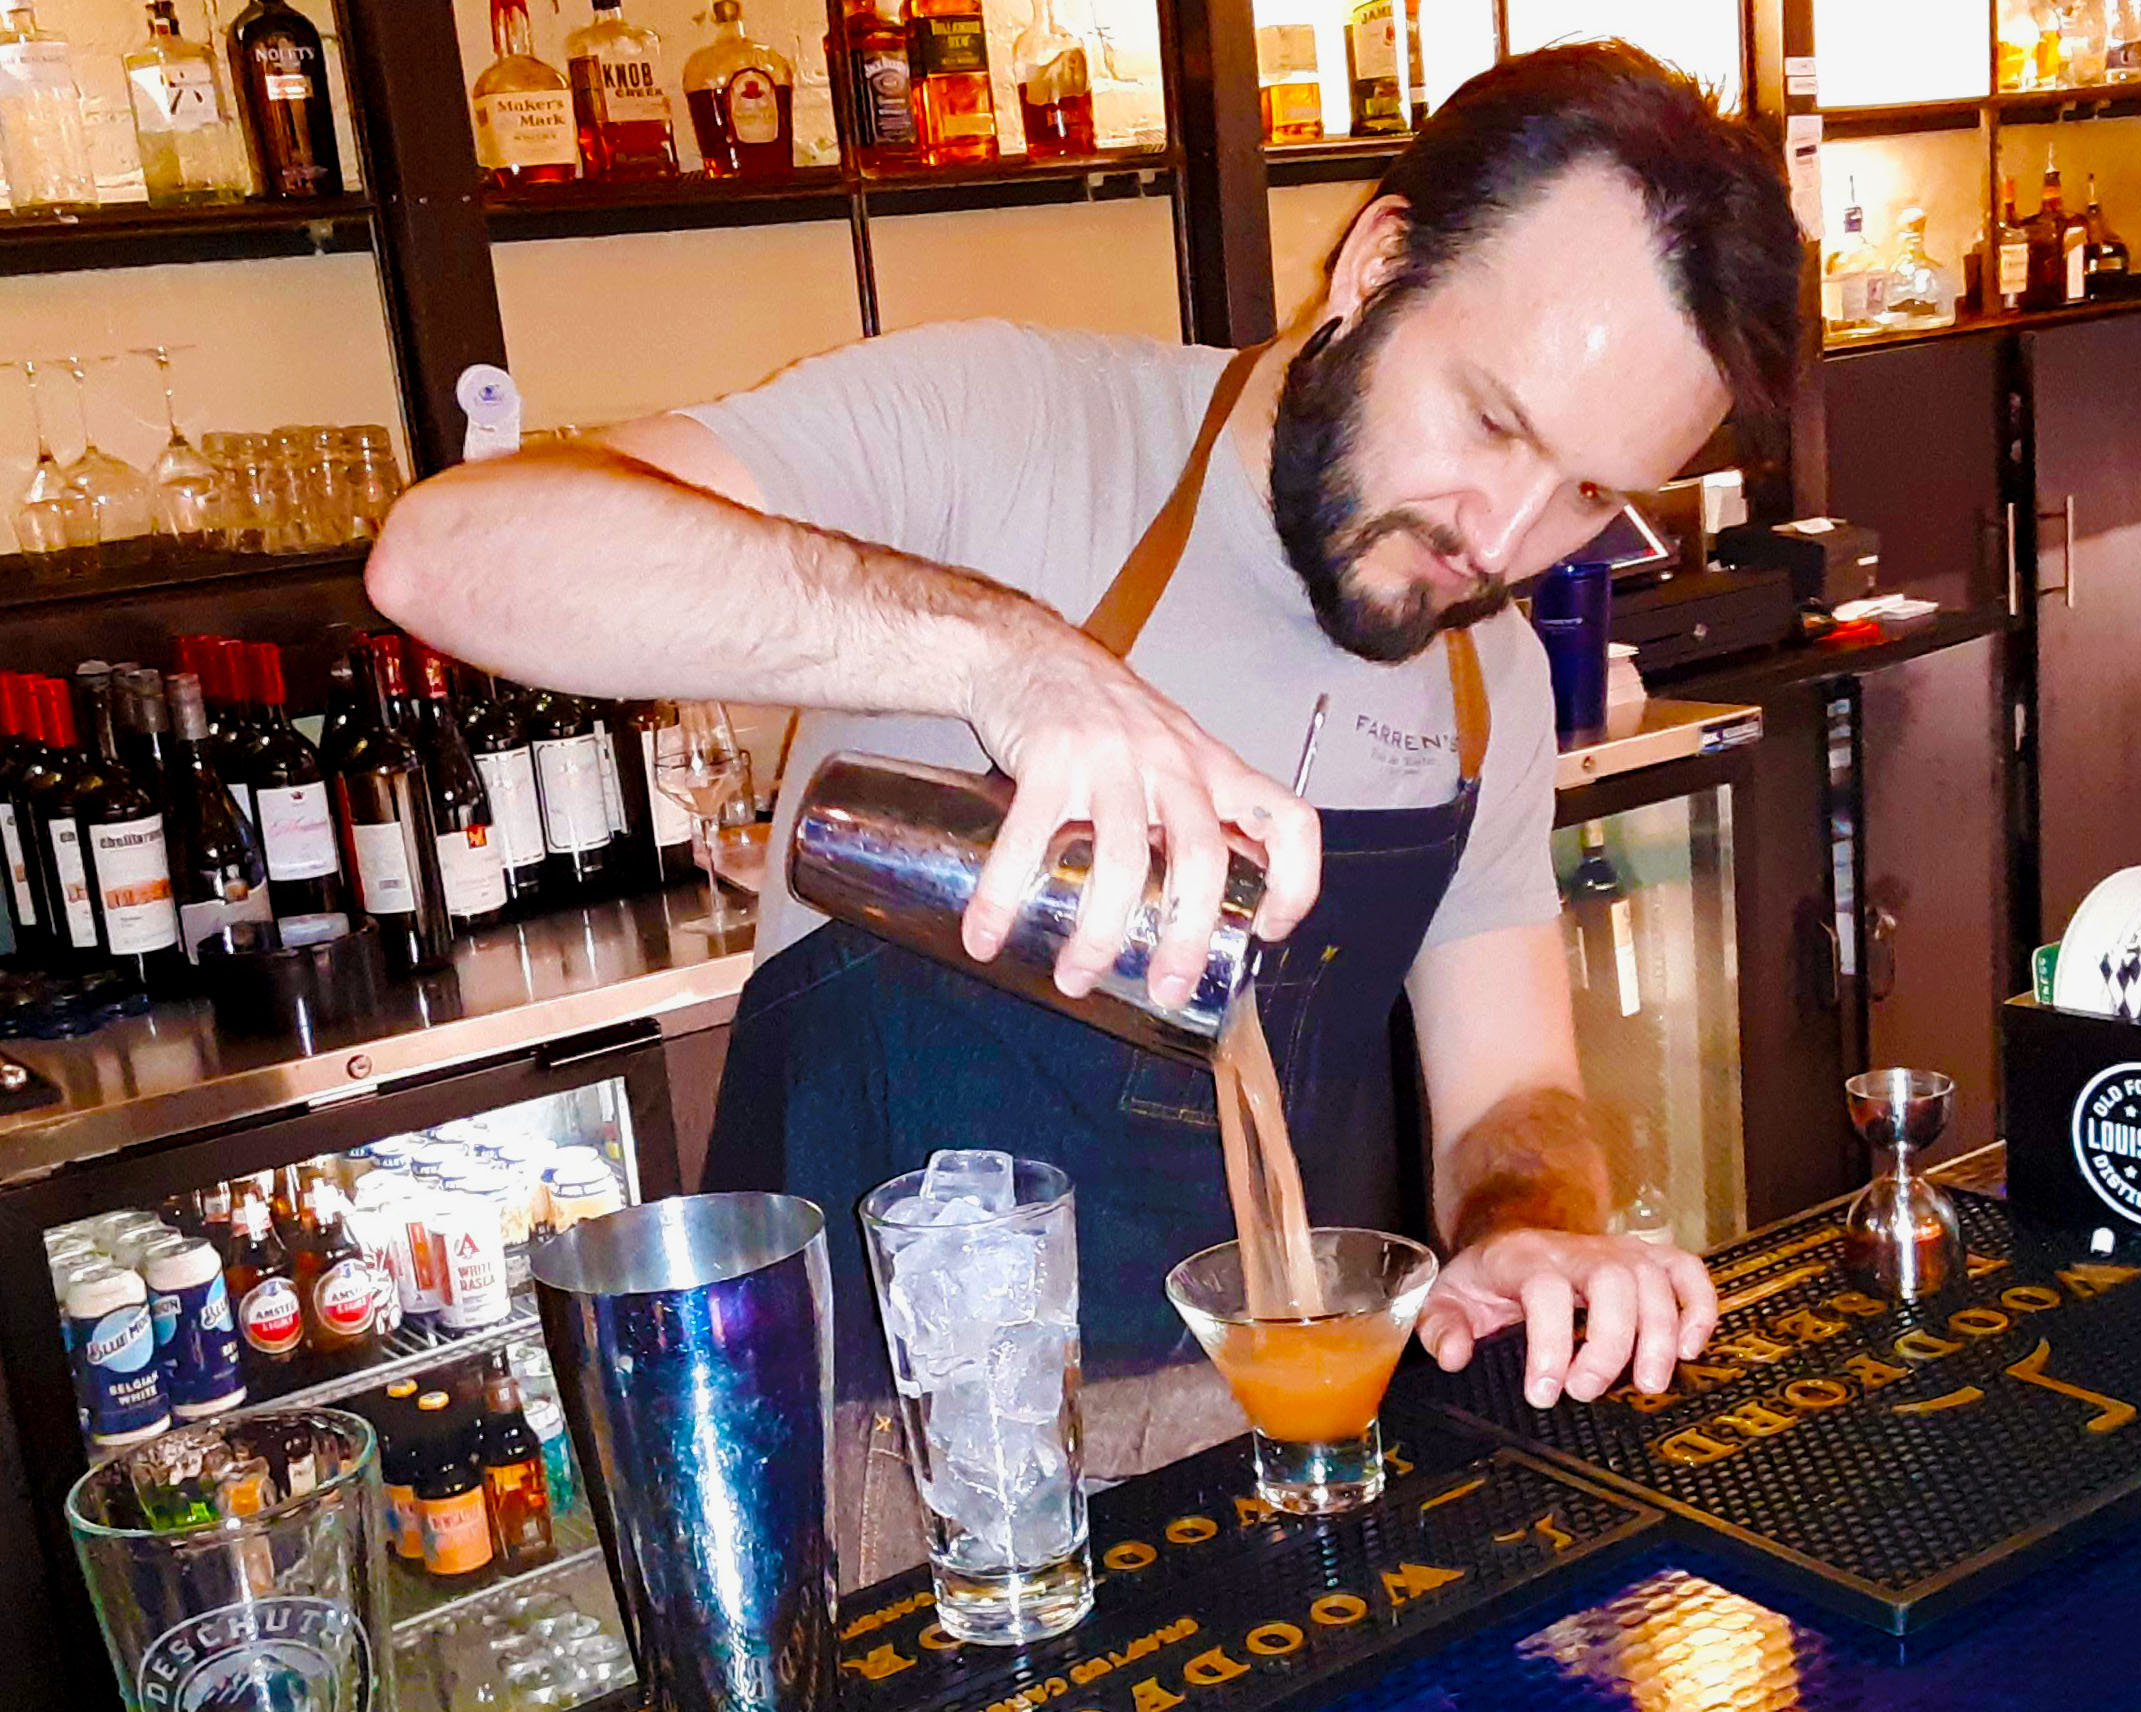 Terry Boyer, bartender at Farren's Pub in Champaign, pours a cocktail into a half glass. Photo by Paul Young.